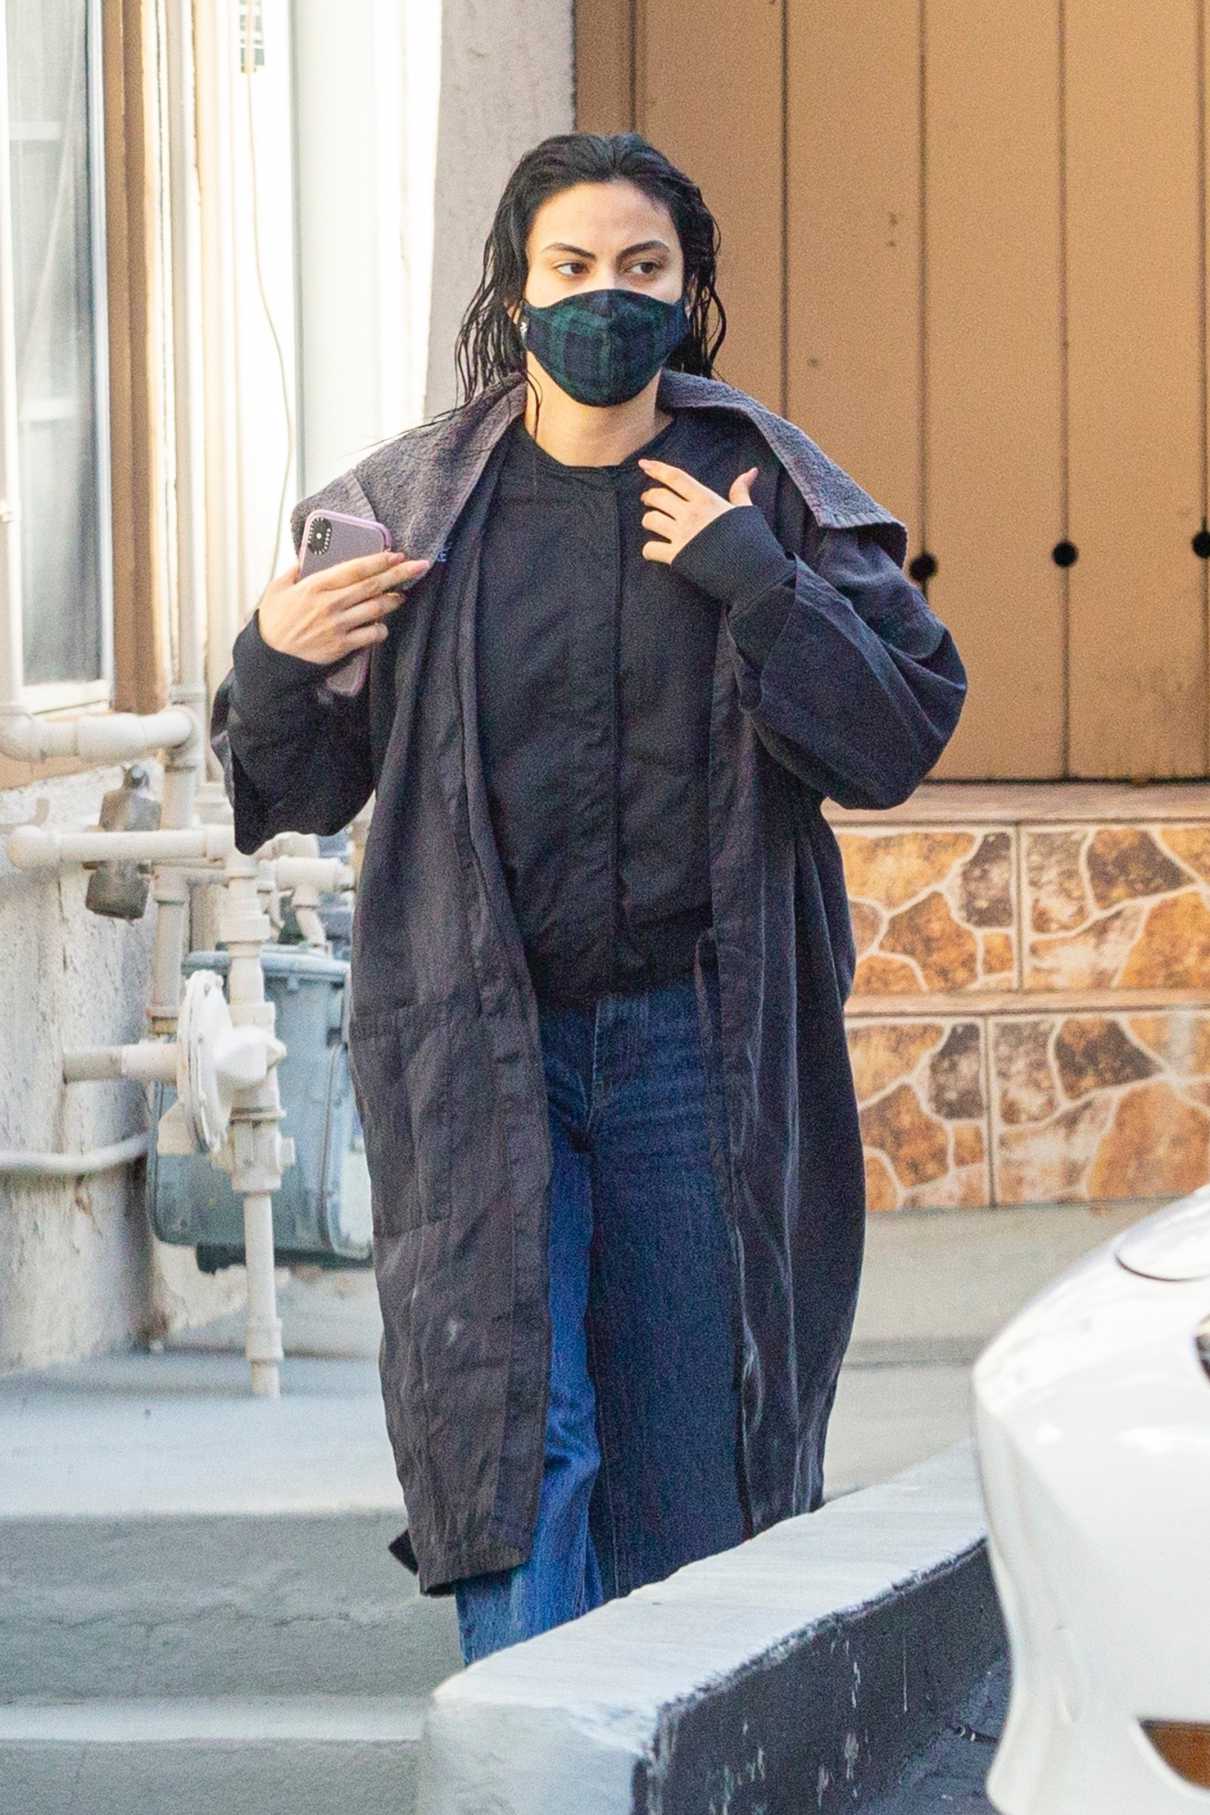 Camila Mendes in a Protective Mask